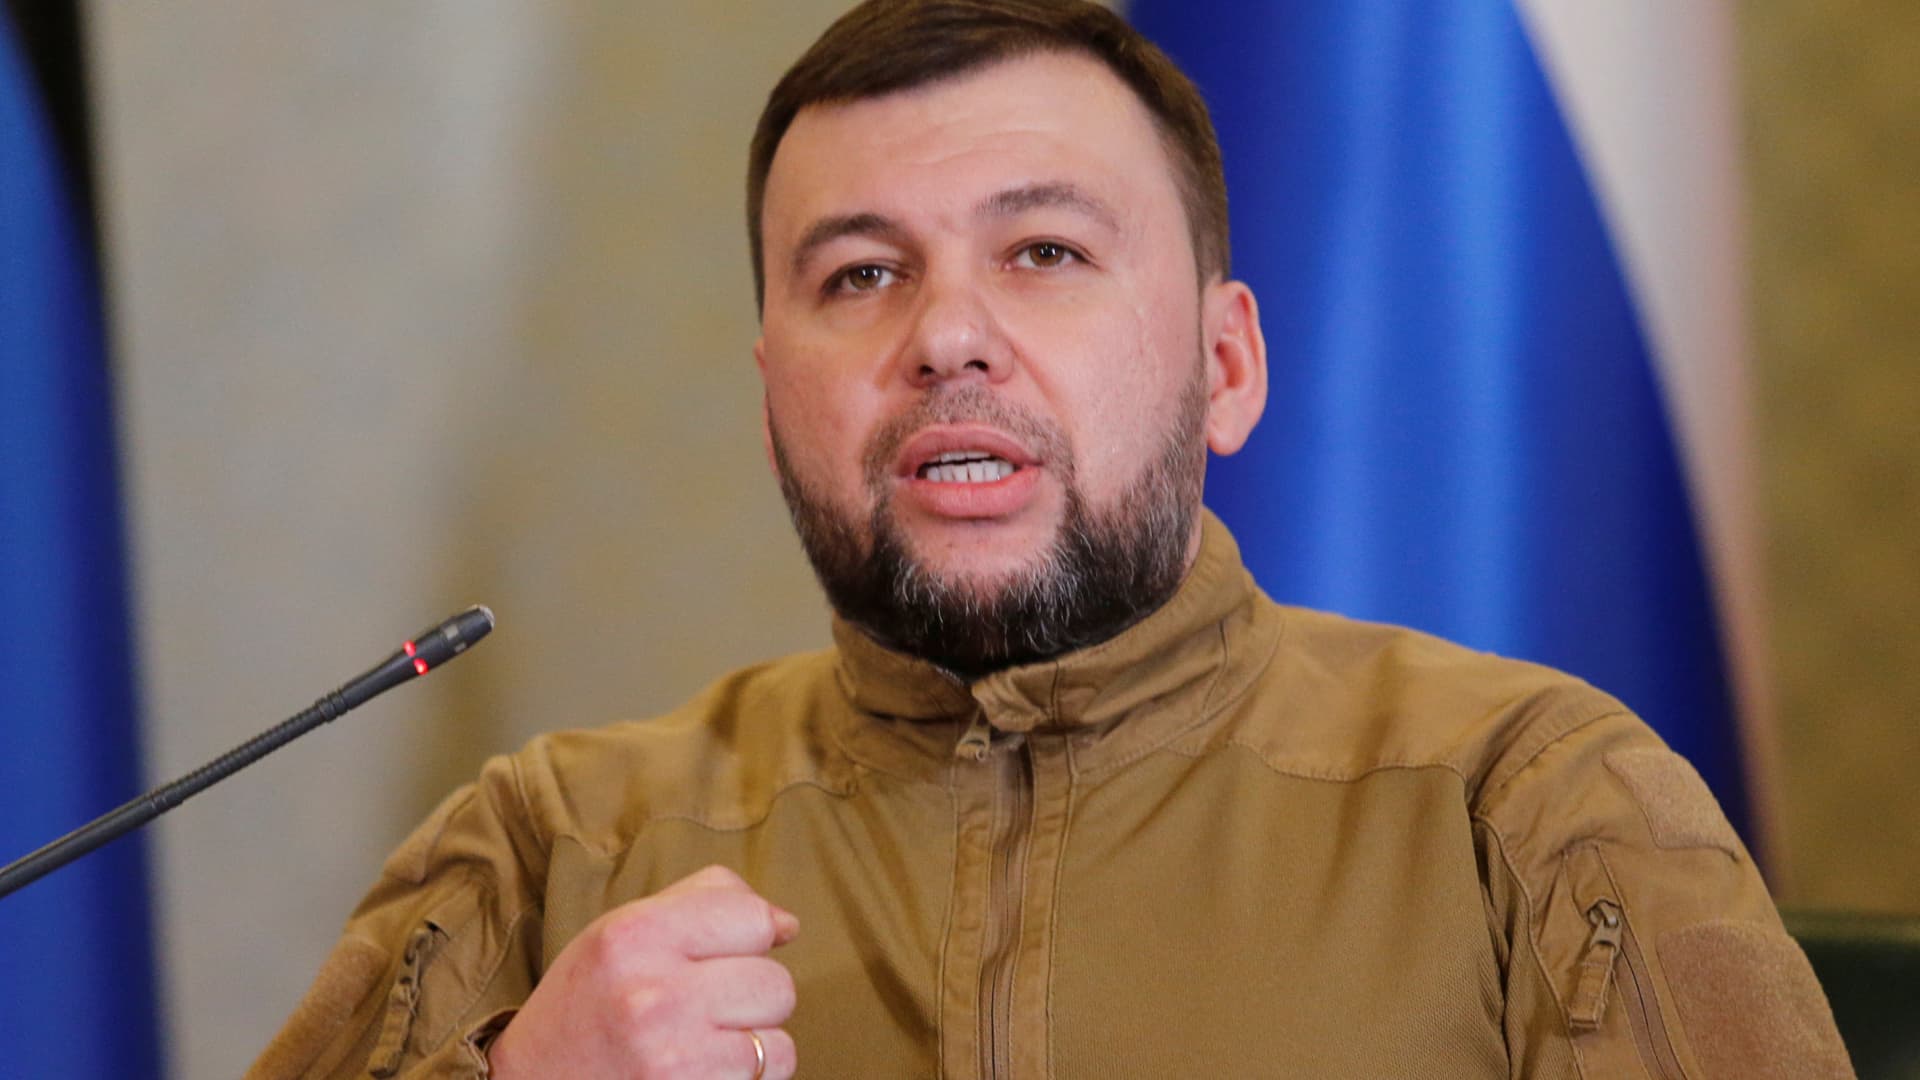 Head of the separatist self-proclaimed Donetsk People's Republic Denis Pushilin speaks during a news conference in Donetsk, Ukraine February 23, 2022.